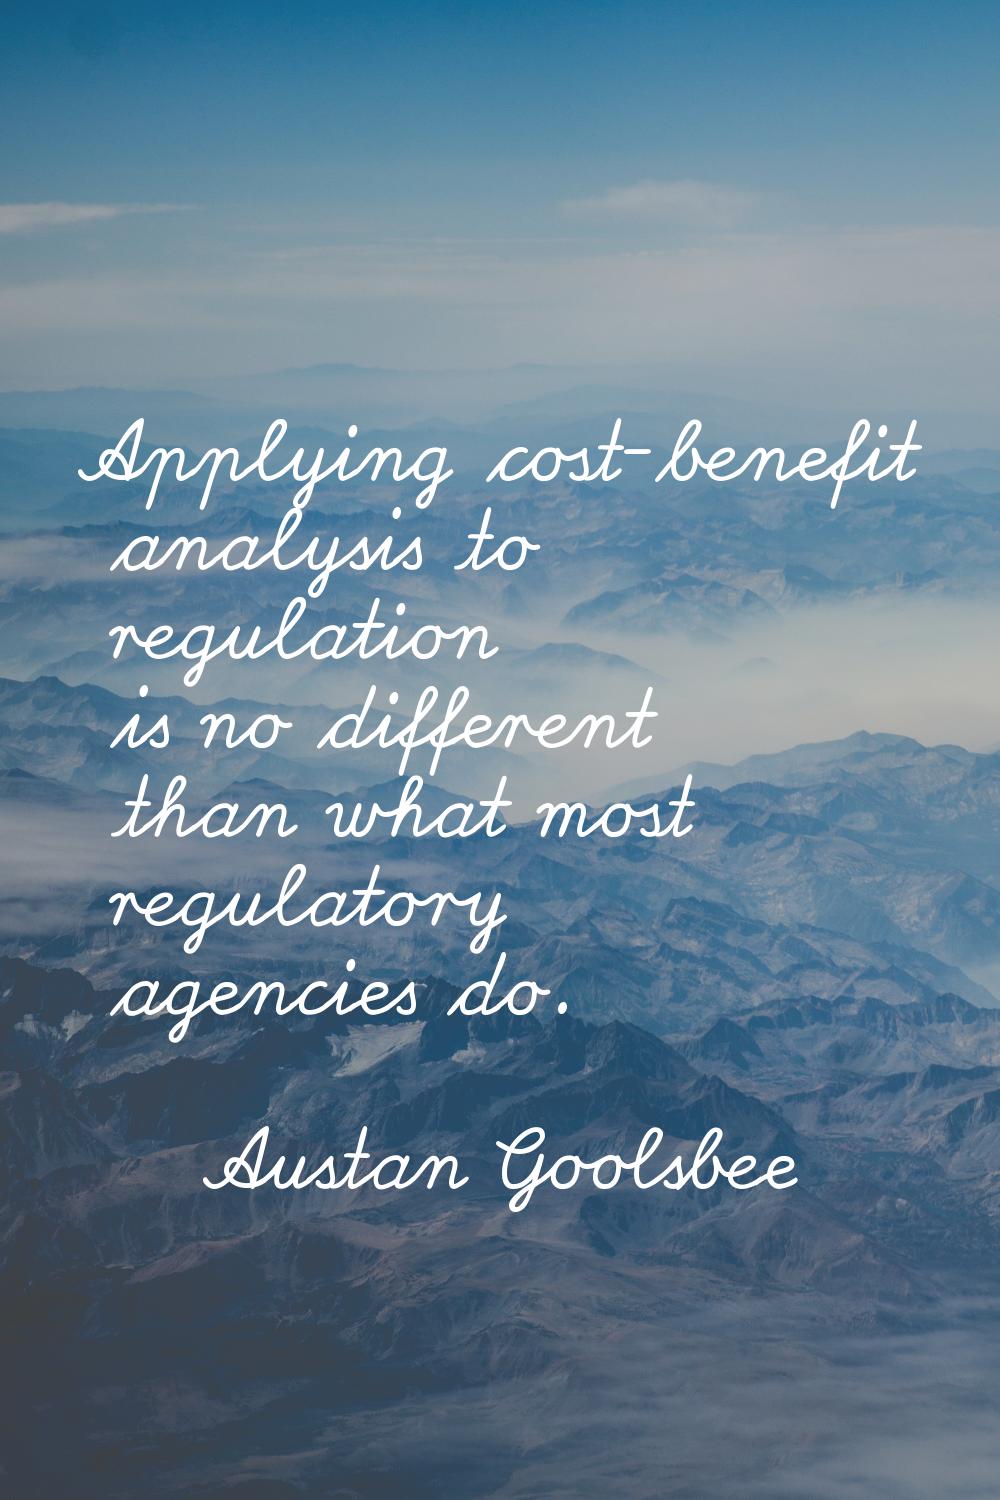 Applying cost-benefit analysis to regulation is no different than what most regulatory agencies do.